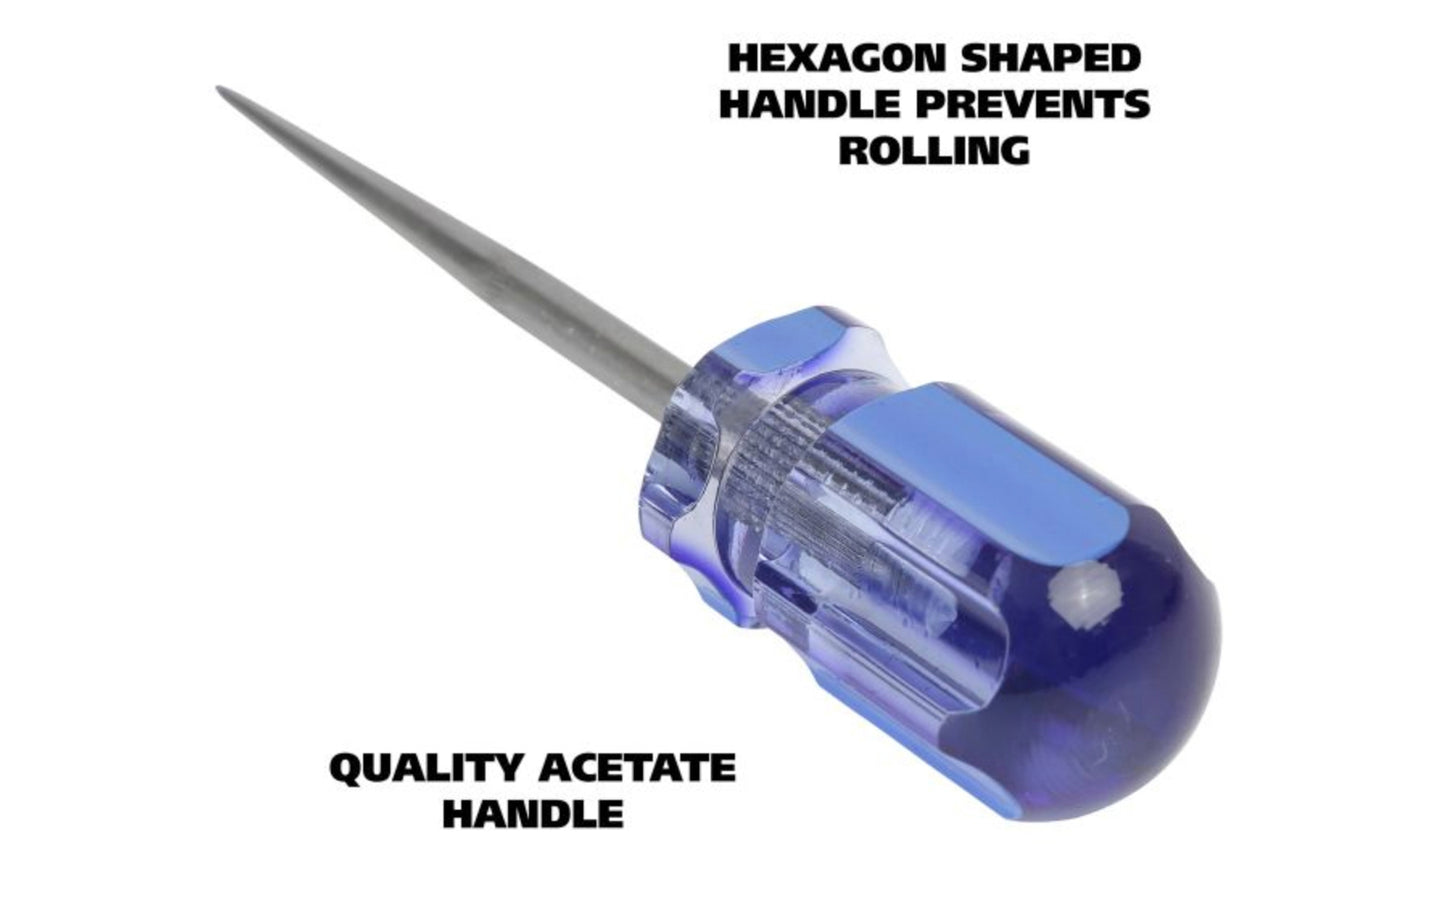 This GreatNeck 3" Scratch Awl is perfect for making quick precision marks on wood projects. Made of chrome vanadium steel for strength & durability, it is set in a quality acetate handle for maximum comfort & control. Great Neck Model SC3C. Made in USA.